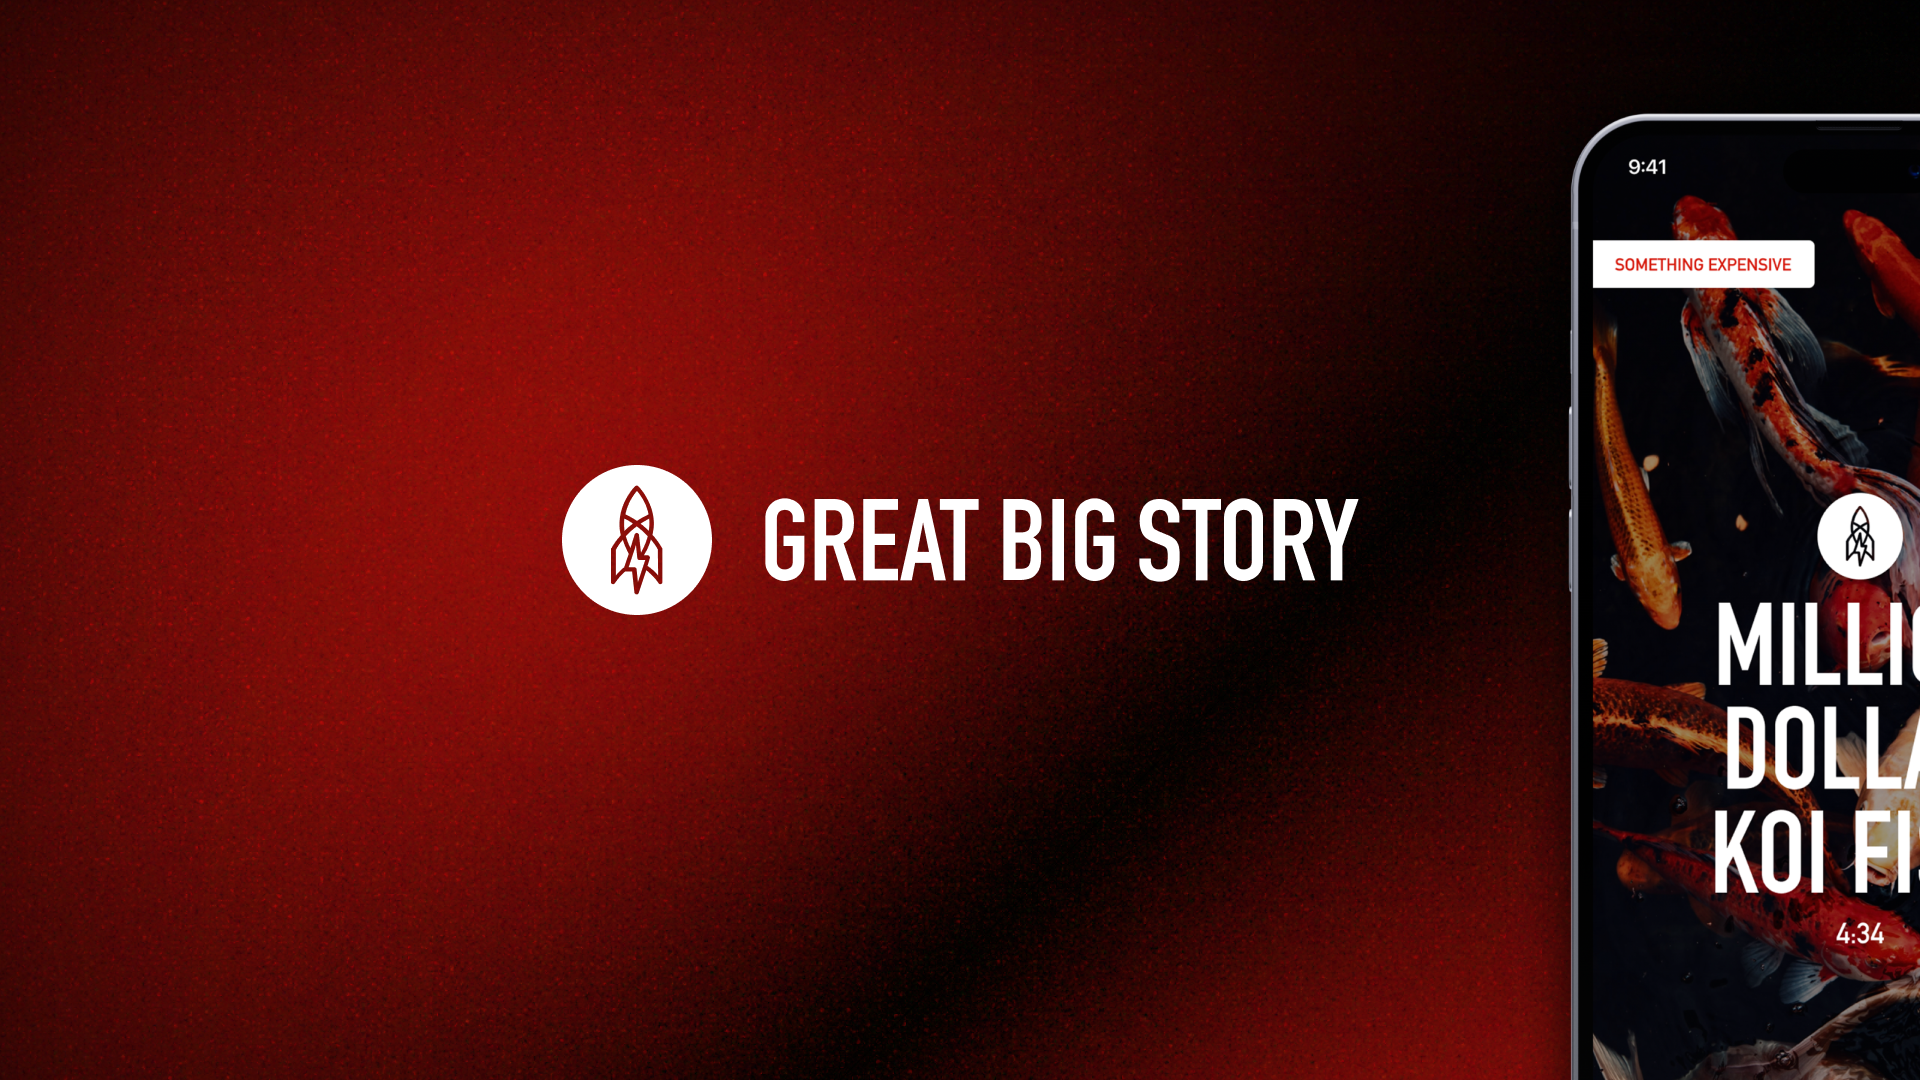 Great Big Story - Overview